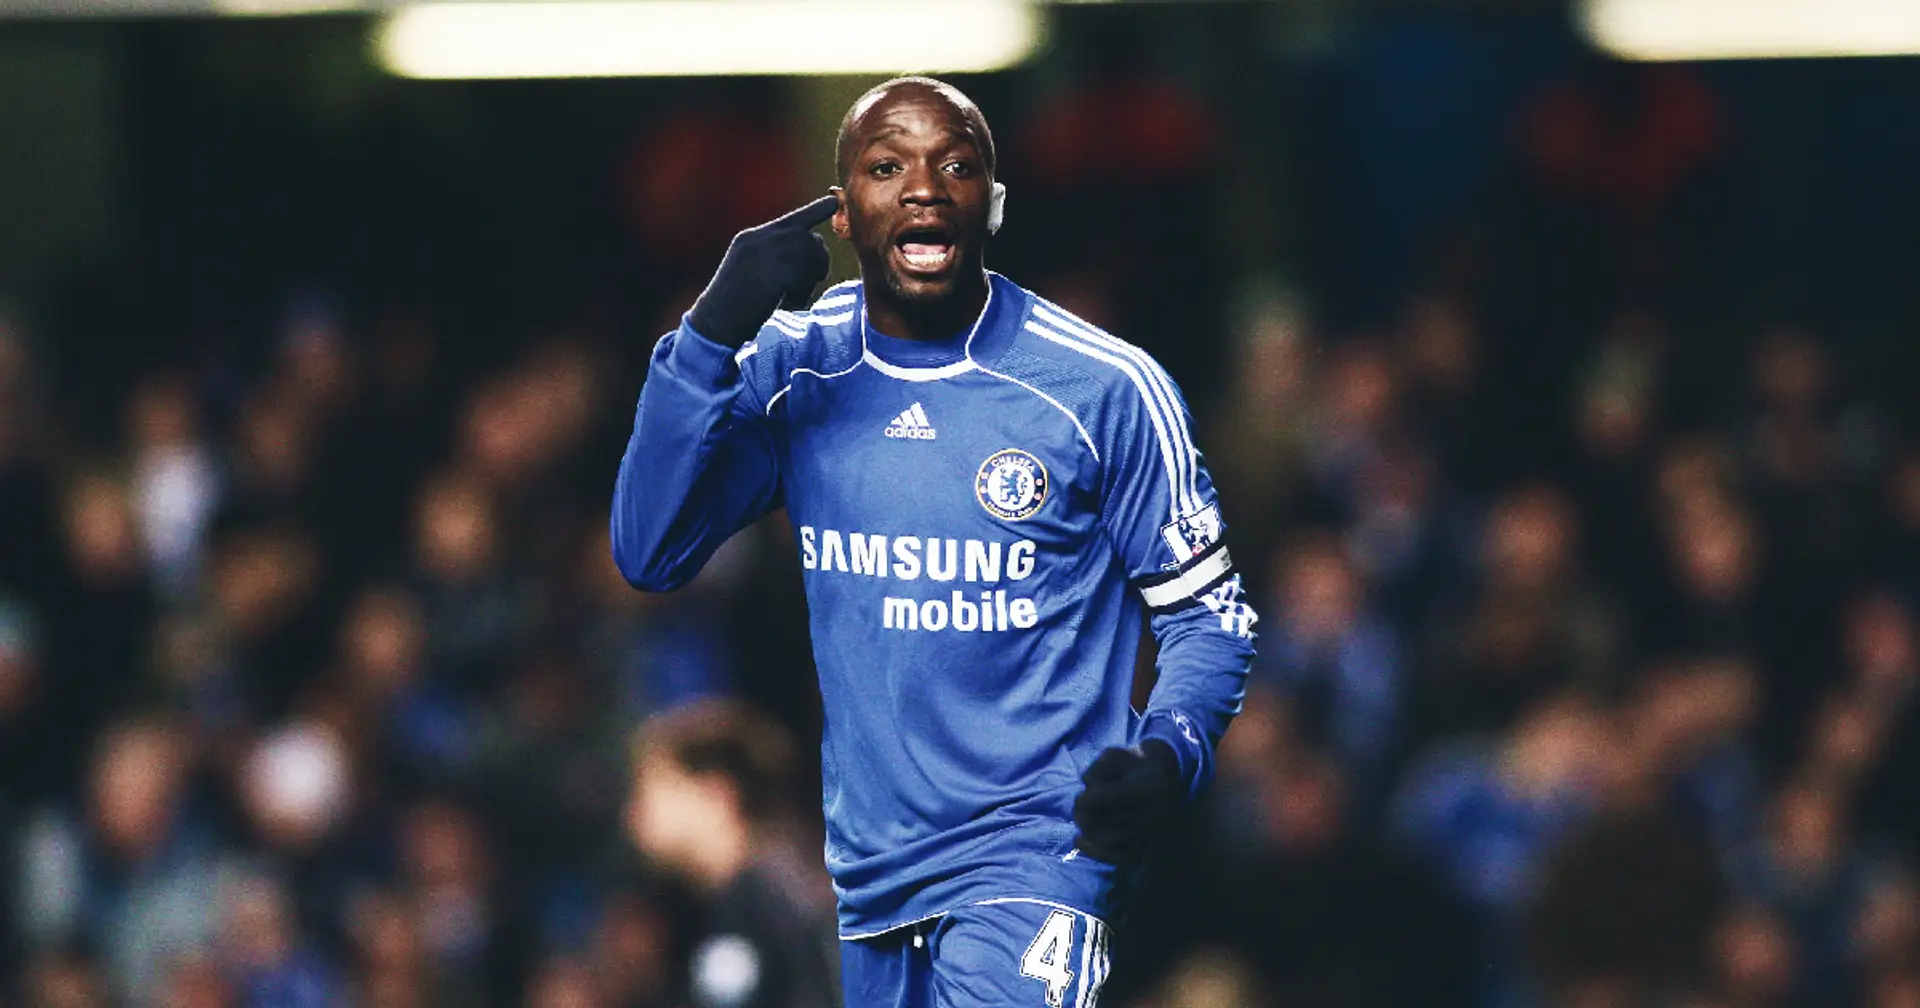 'Sell Perez': How Madrid fans reacted to Chelsea signing Claude Makelele back in 2003